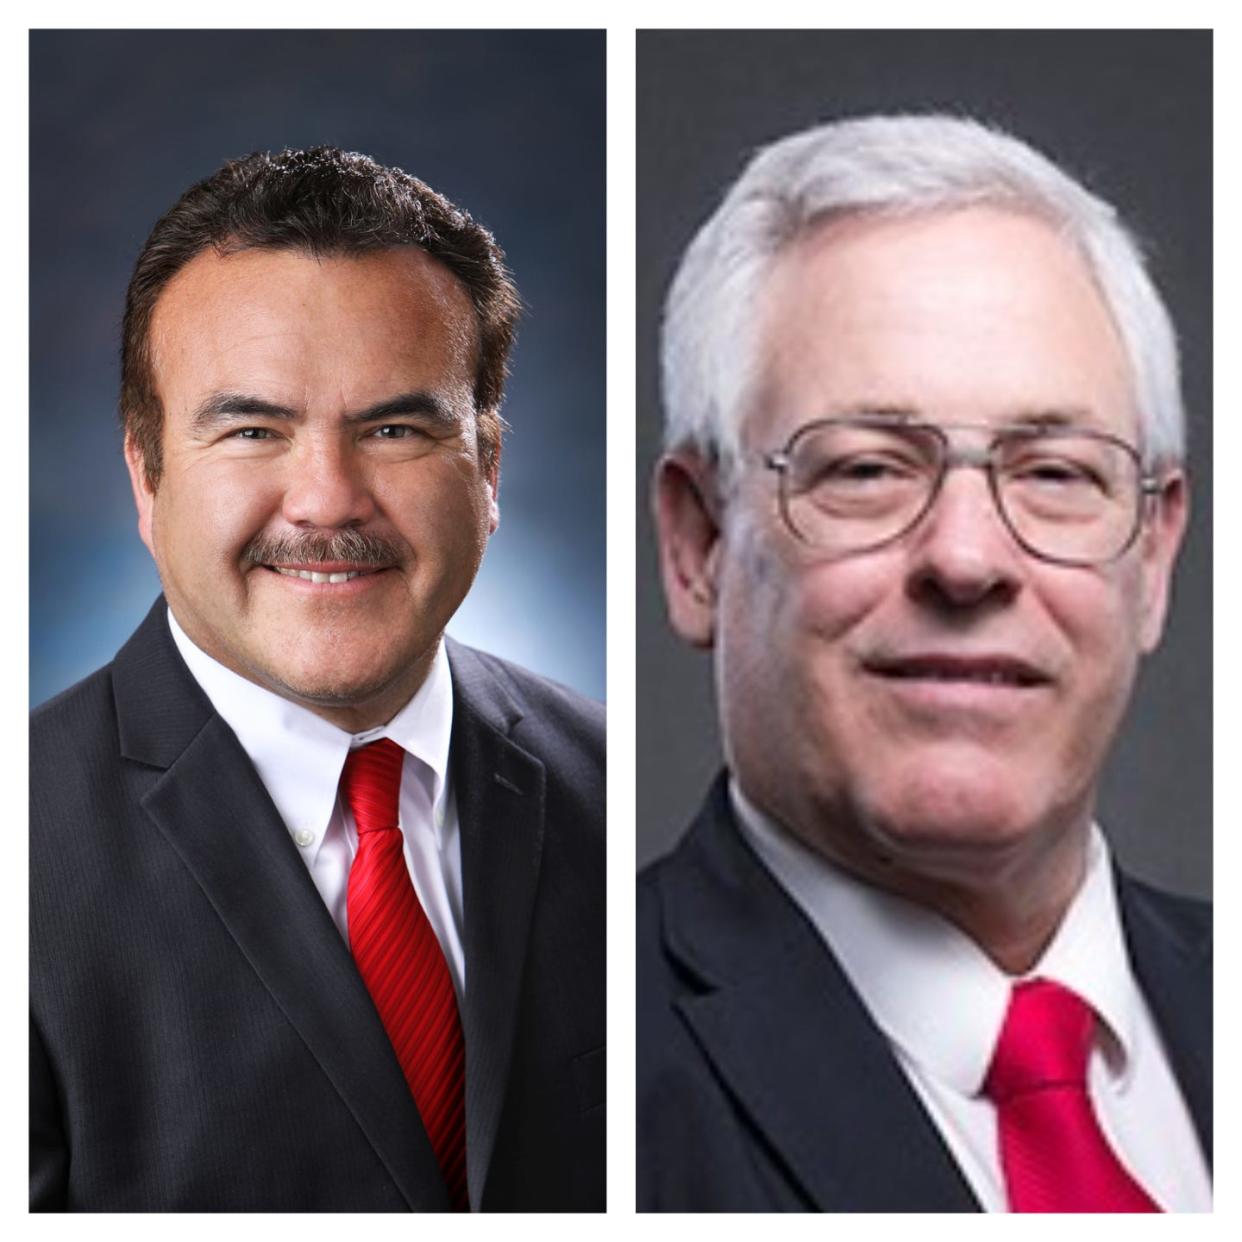 Superintendent of Schools Ted Alejandre (left) wields a vast campaign treasure chest and endorsement list while challenger Ken Larson takes a populist tenor.